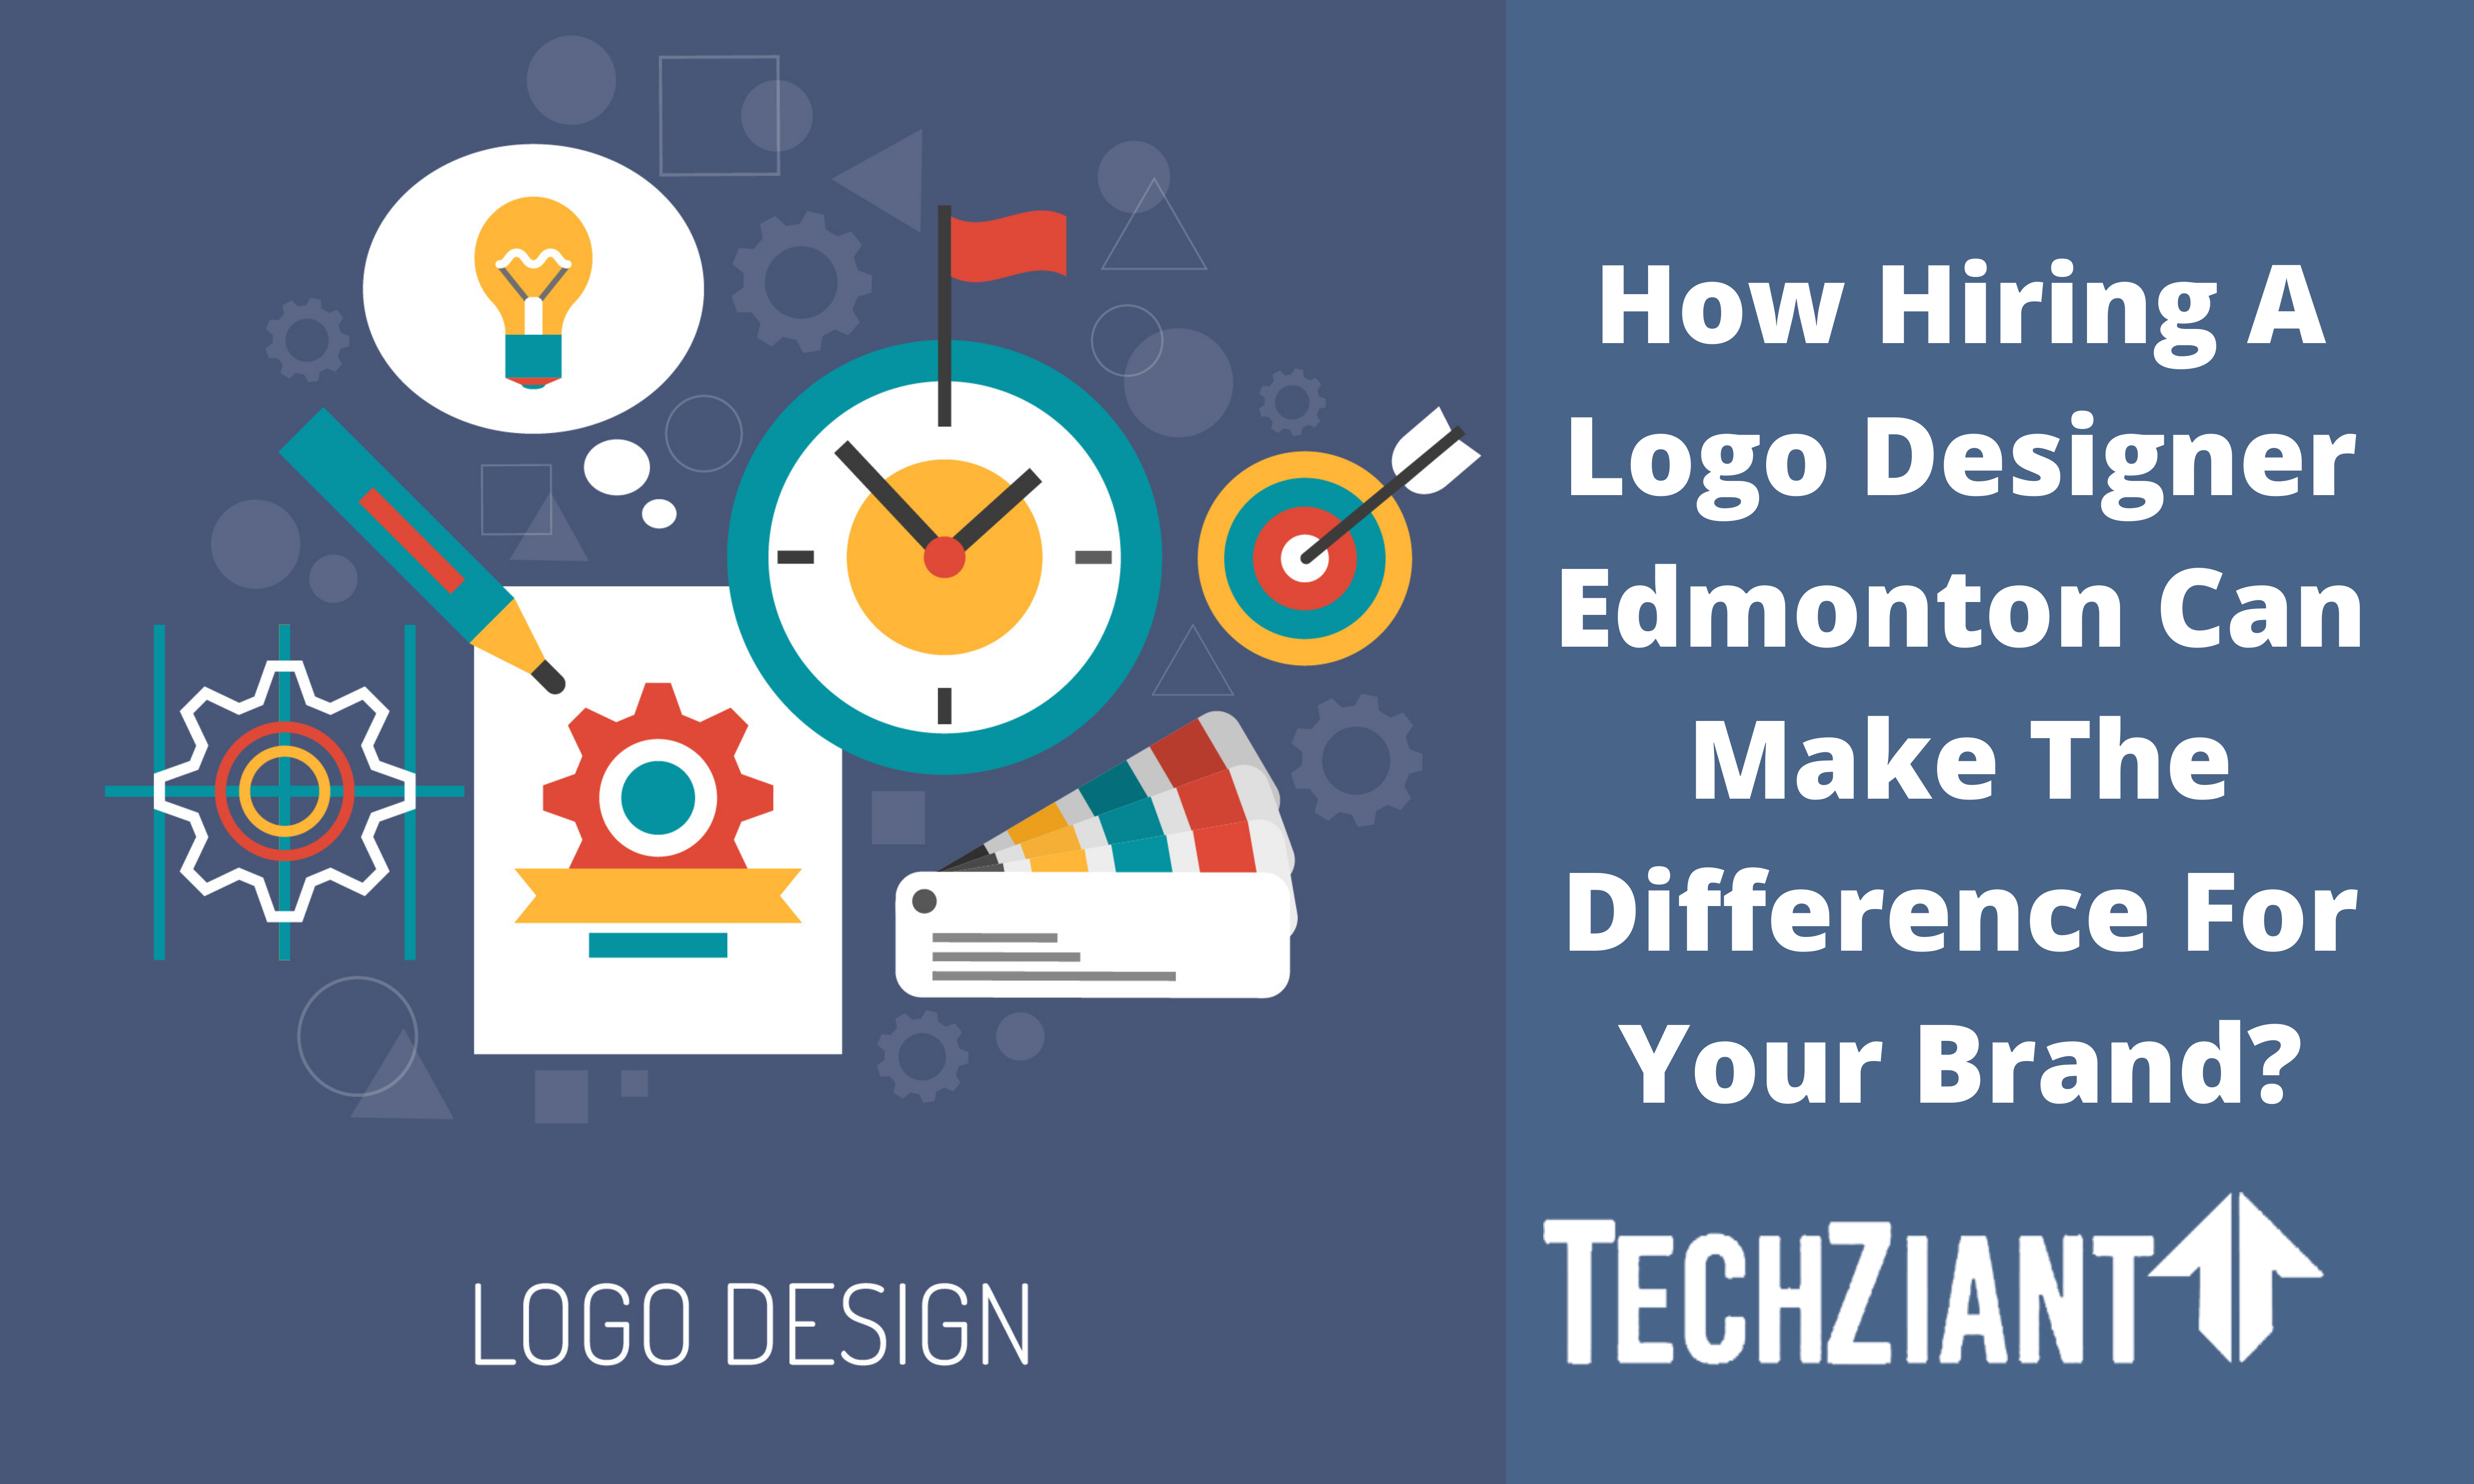 How Hiring A Logo Designer Edmonton Can Make The Difference For Your Brand?